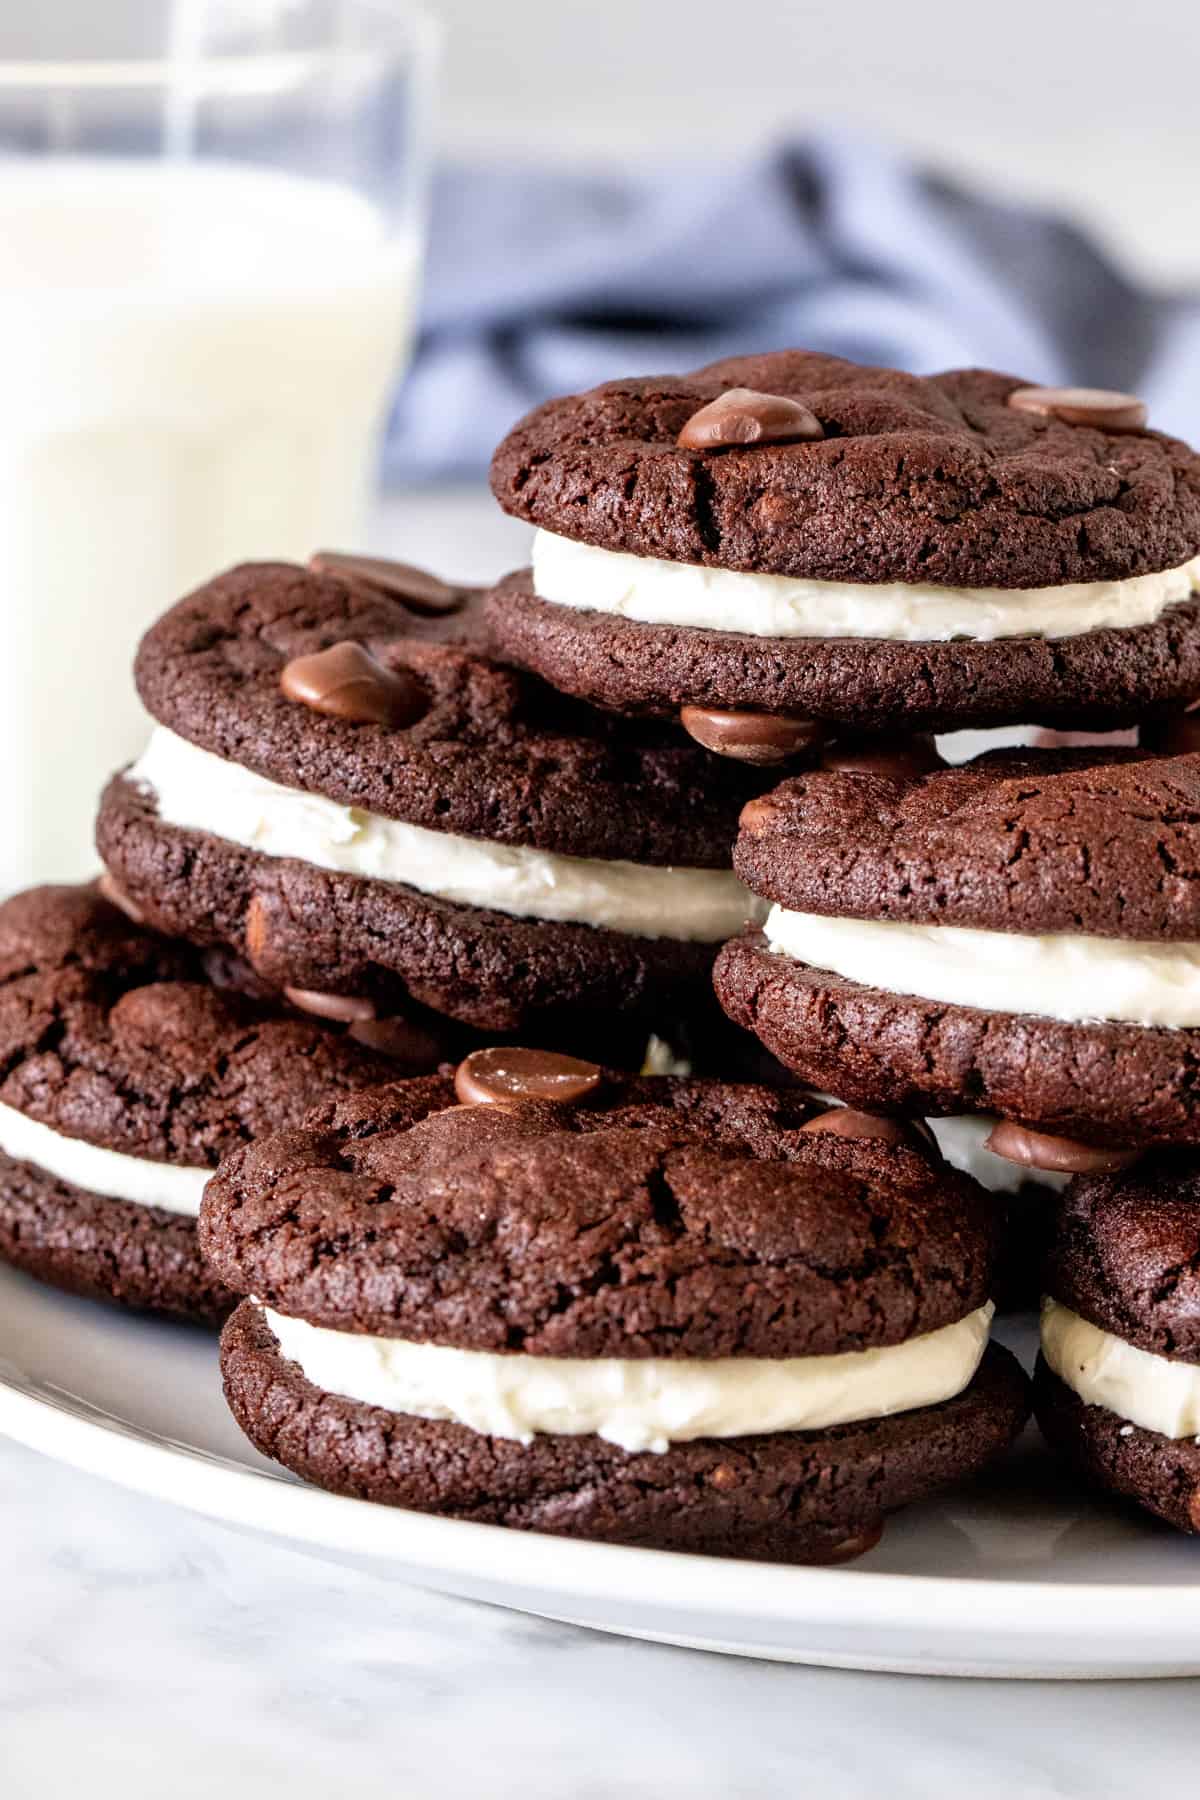 Plate of chocolate sandwich cookies with a glass of milk. 